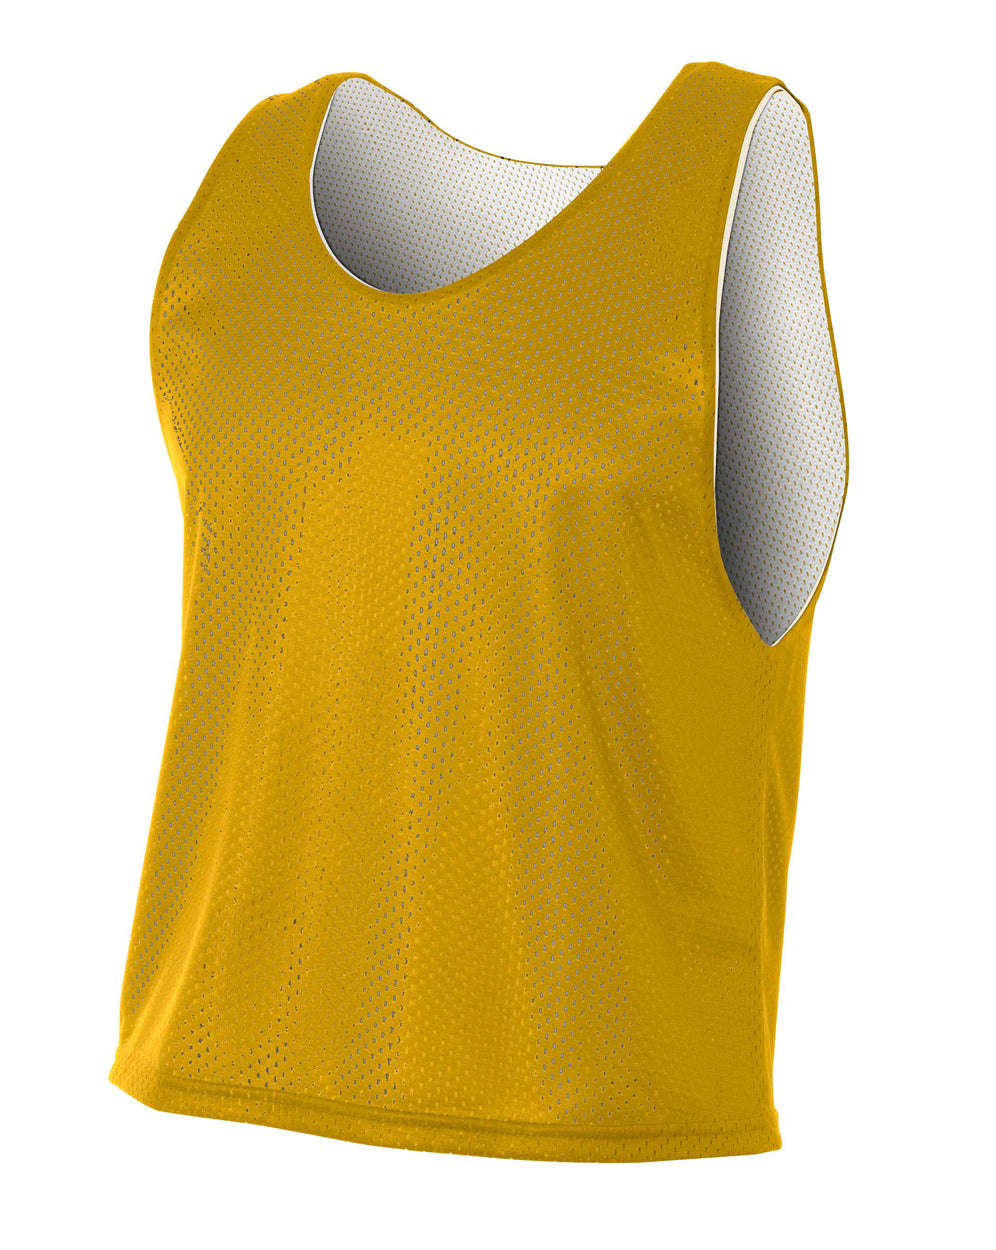 Gold/white A4 Lacrosse Reversible Practice Jersey